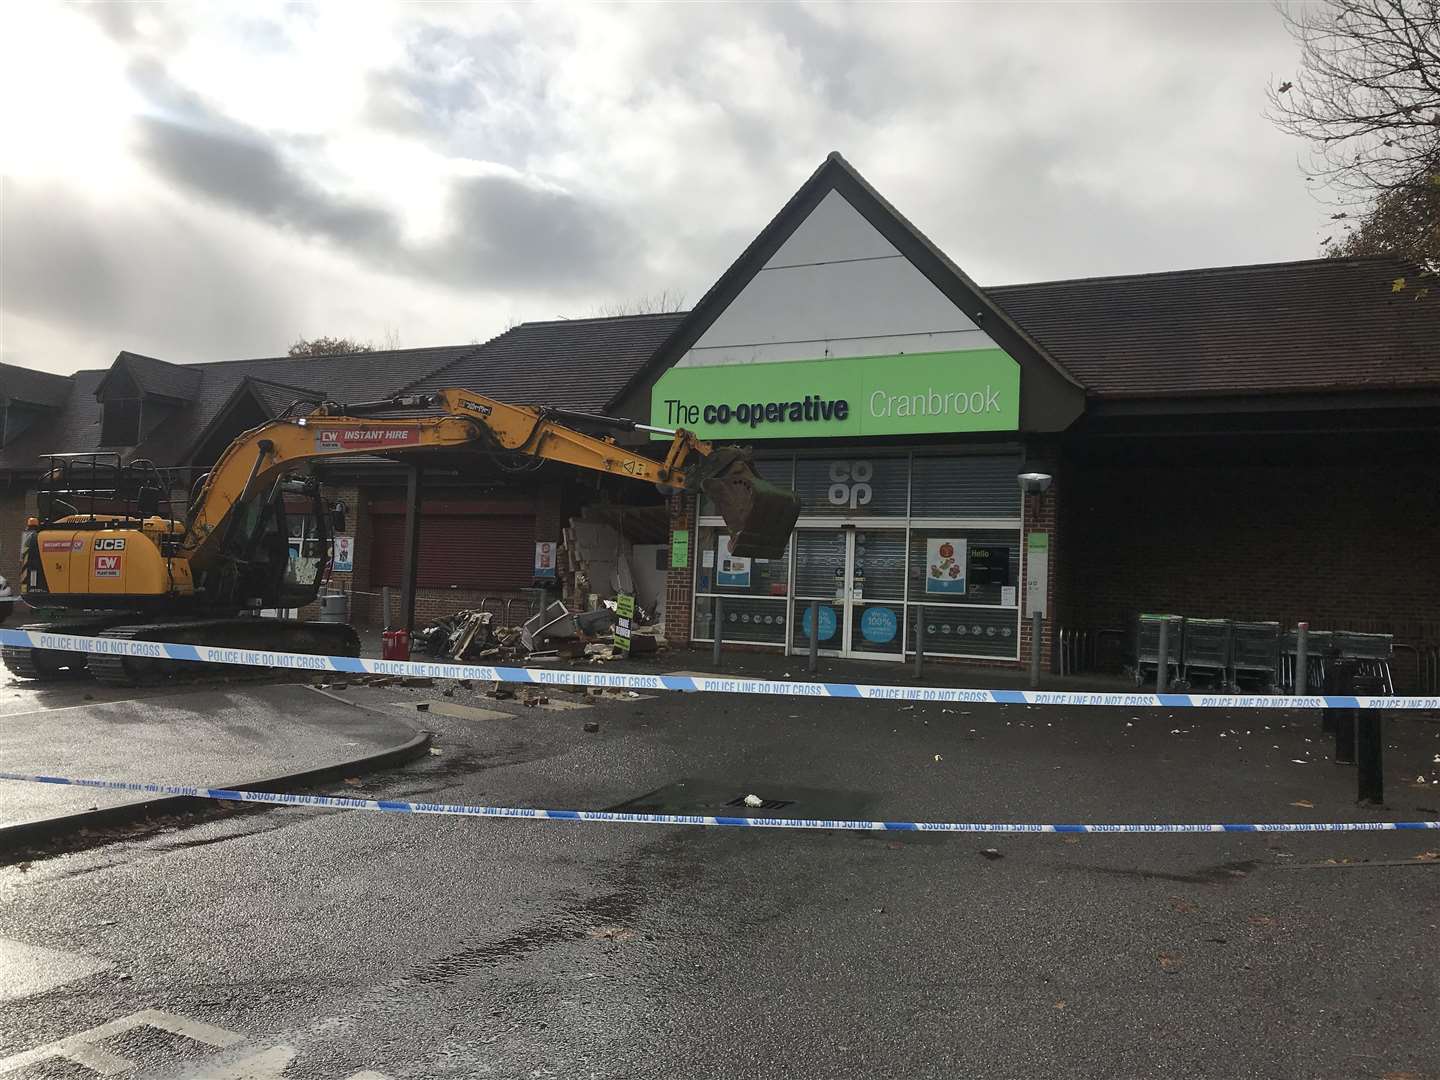 The digger is still at the scene